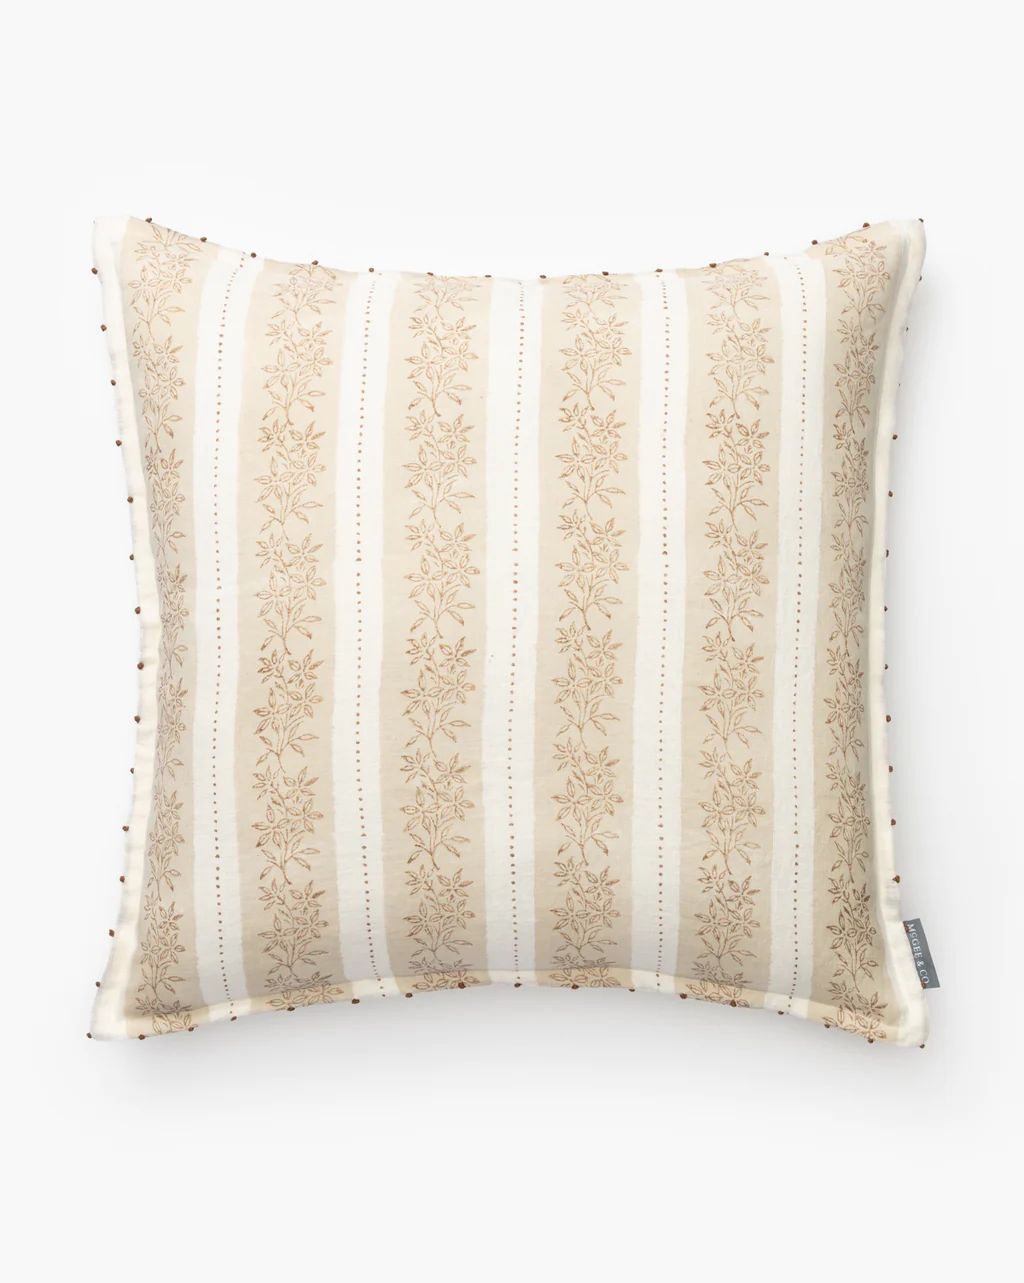 Nettles Pillow Cover | McGee & Co.